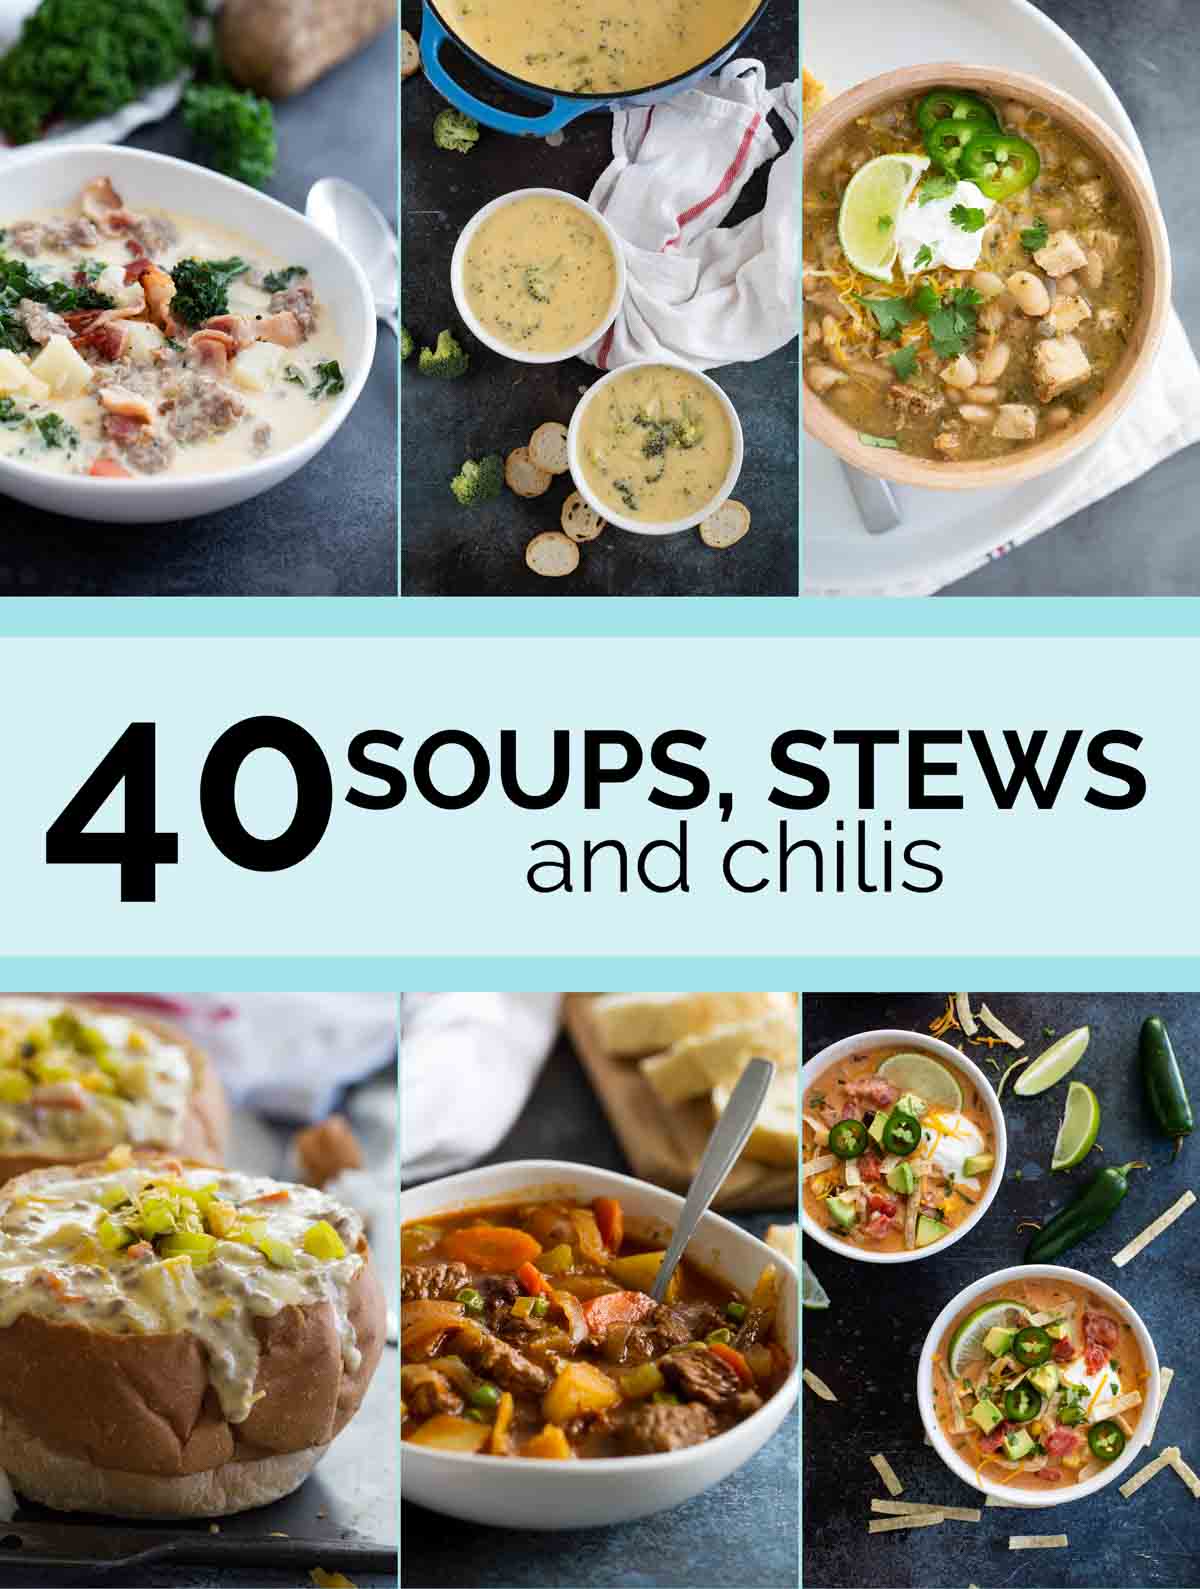 Collage with 6 soup photos and text bar in the middle for Soup Recipes.